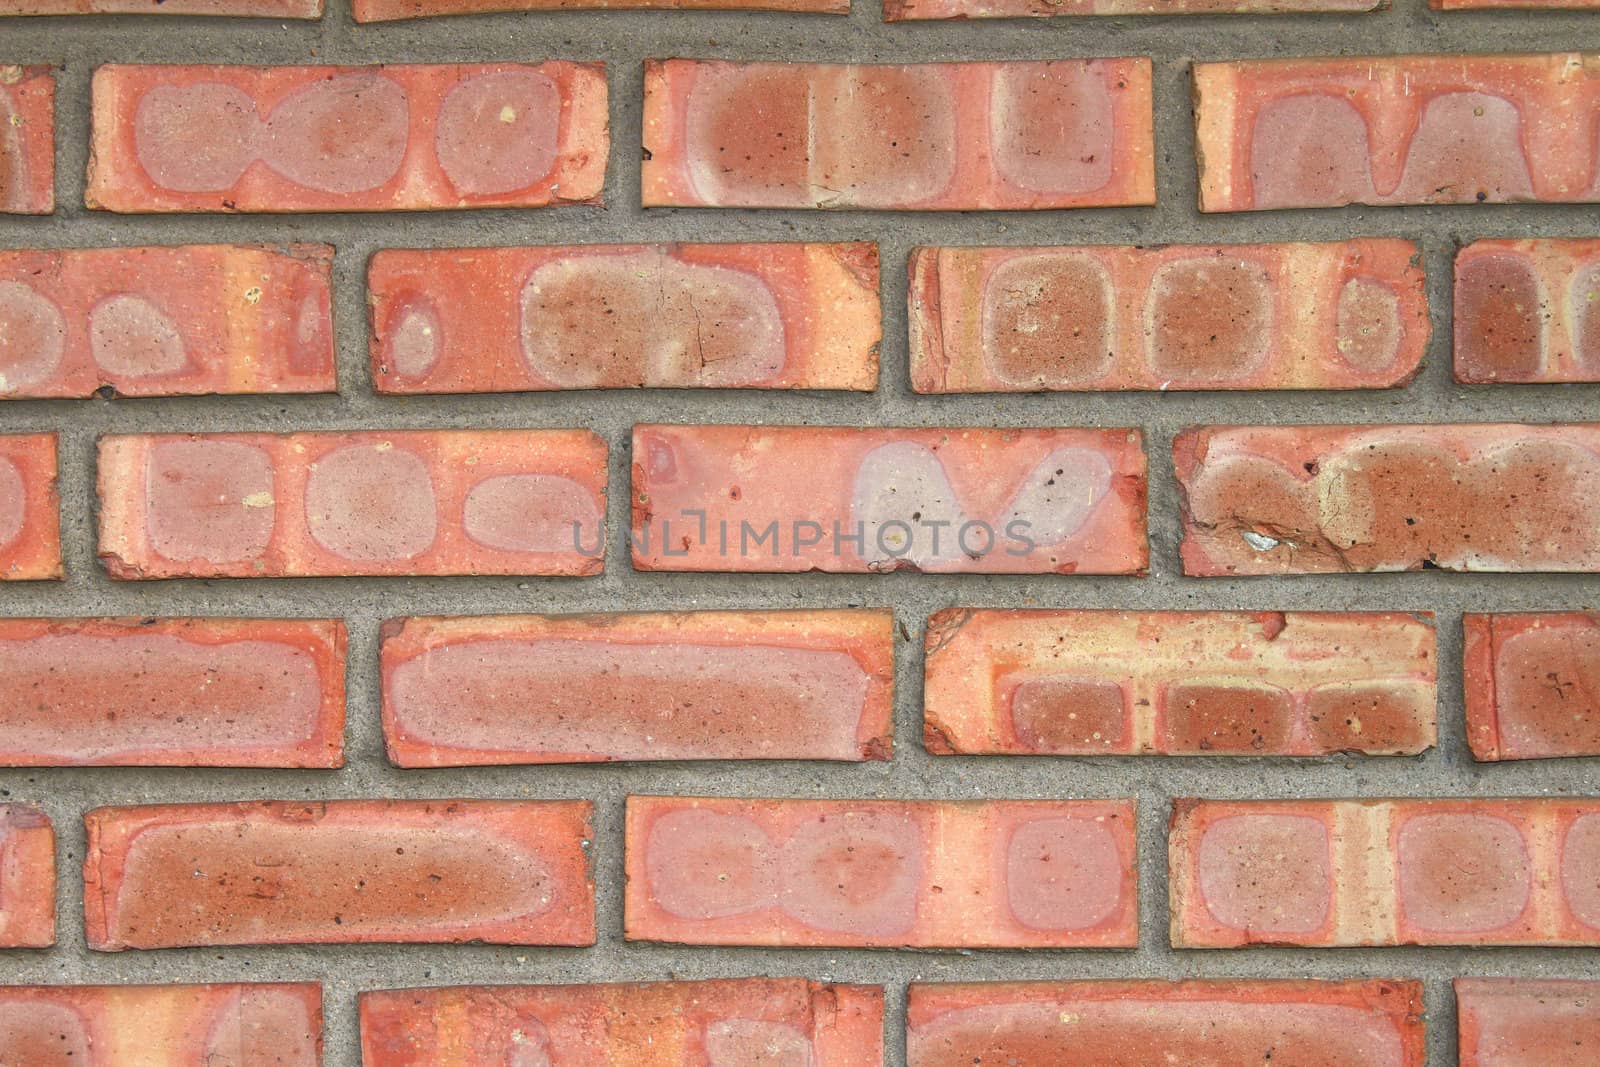 A Bright Red Brick Background